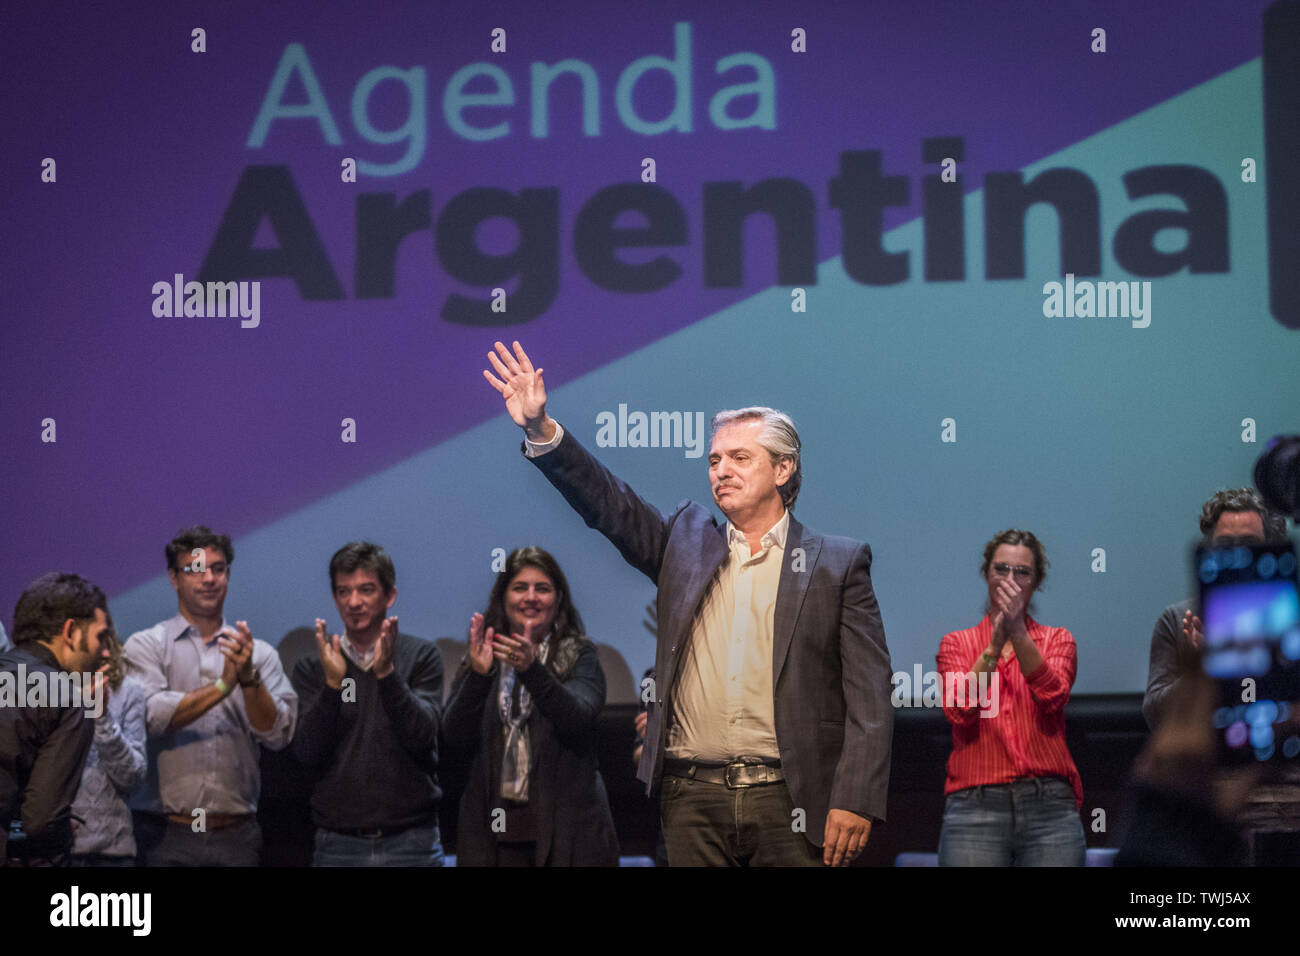 City Of Buenos Aires, City of Buenos Aires, Argentina. 15th June, 2019. WorldNews. INT.- June 15, 2019. City of Buenos Aires, Argentina.- Arhive picture. ALBERTO FERNANDEZ, president candidate in Argentina, at the Metropolitan University for Education and Work Credit: Julieta Ferrario/ZUMA Wire/Alamy Live News Stock Photo